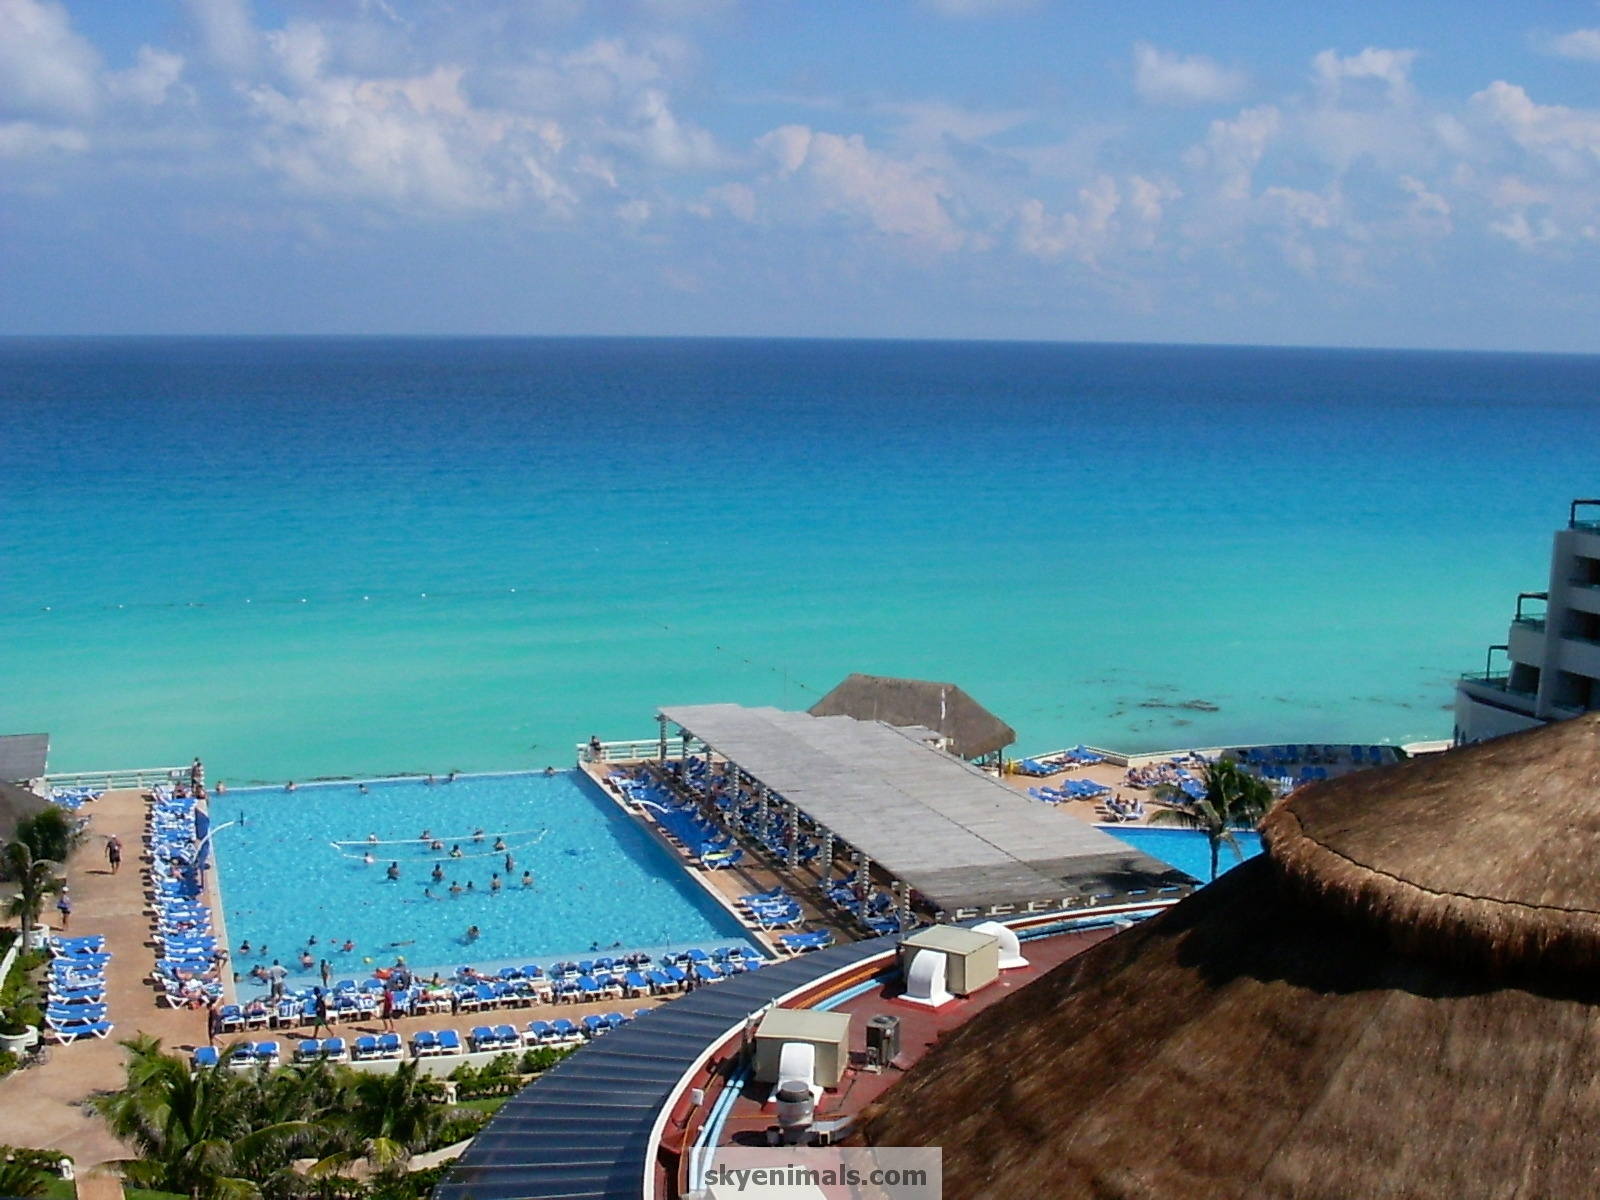 Resort In Cancun Mexico Wallpaper Image